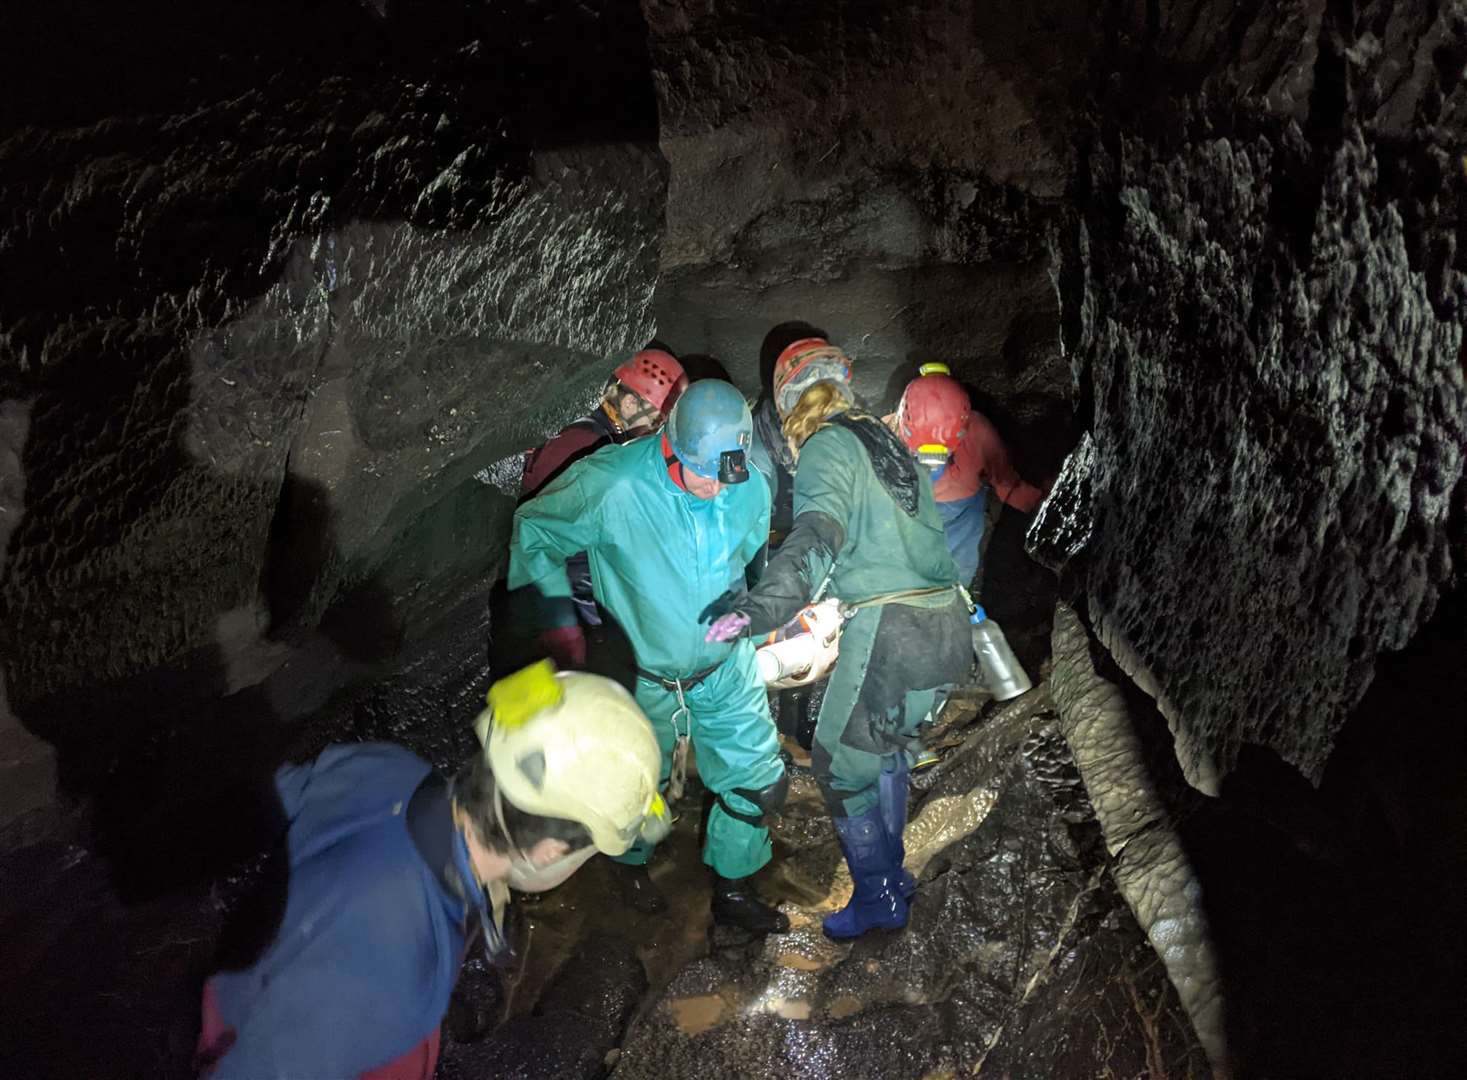 Rescuers carry George Linnane on a stretcher through the cave to safety (South & Mid Wales Cave Rescue Team/PA)